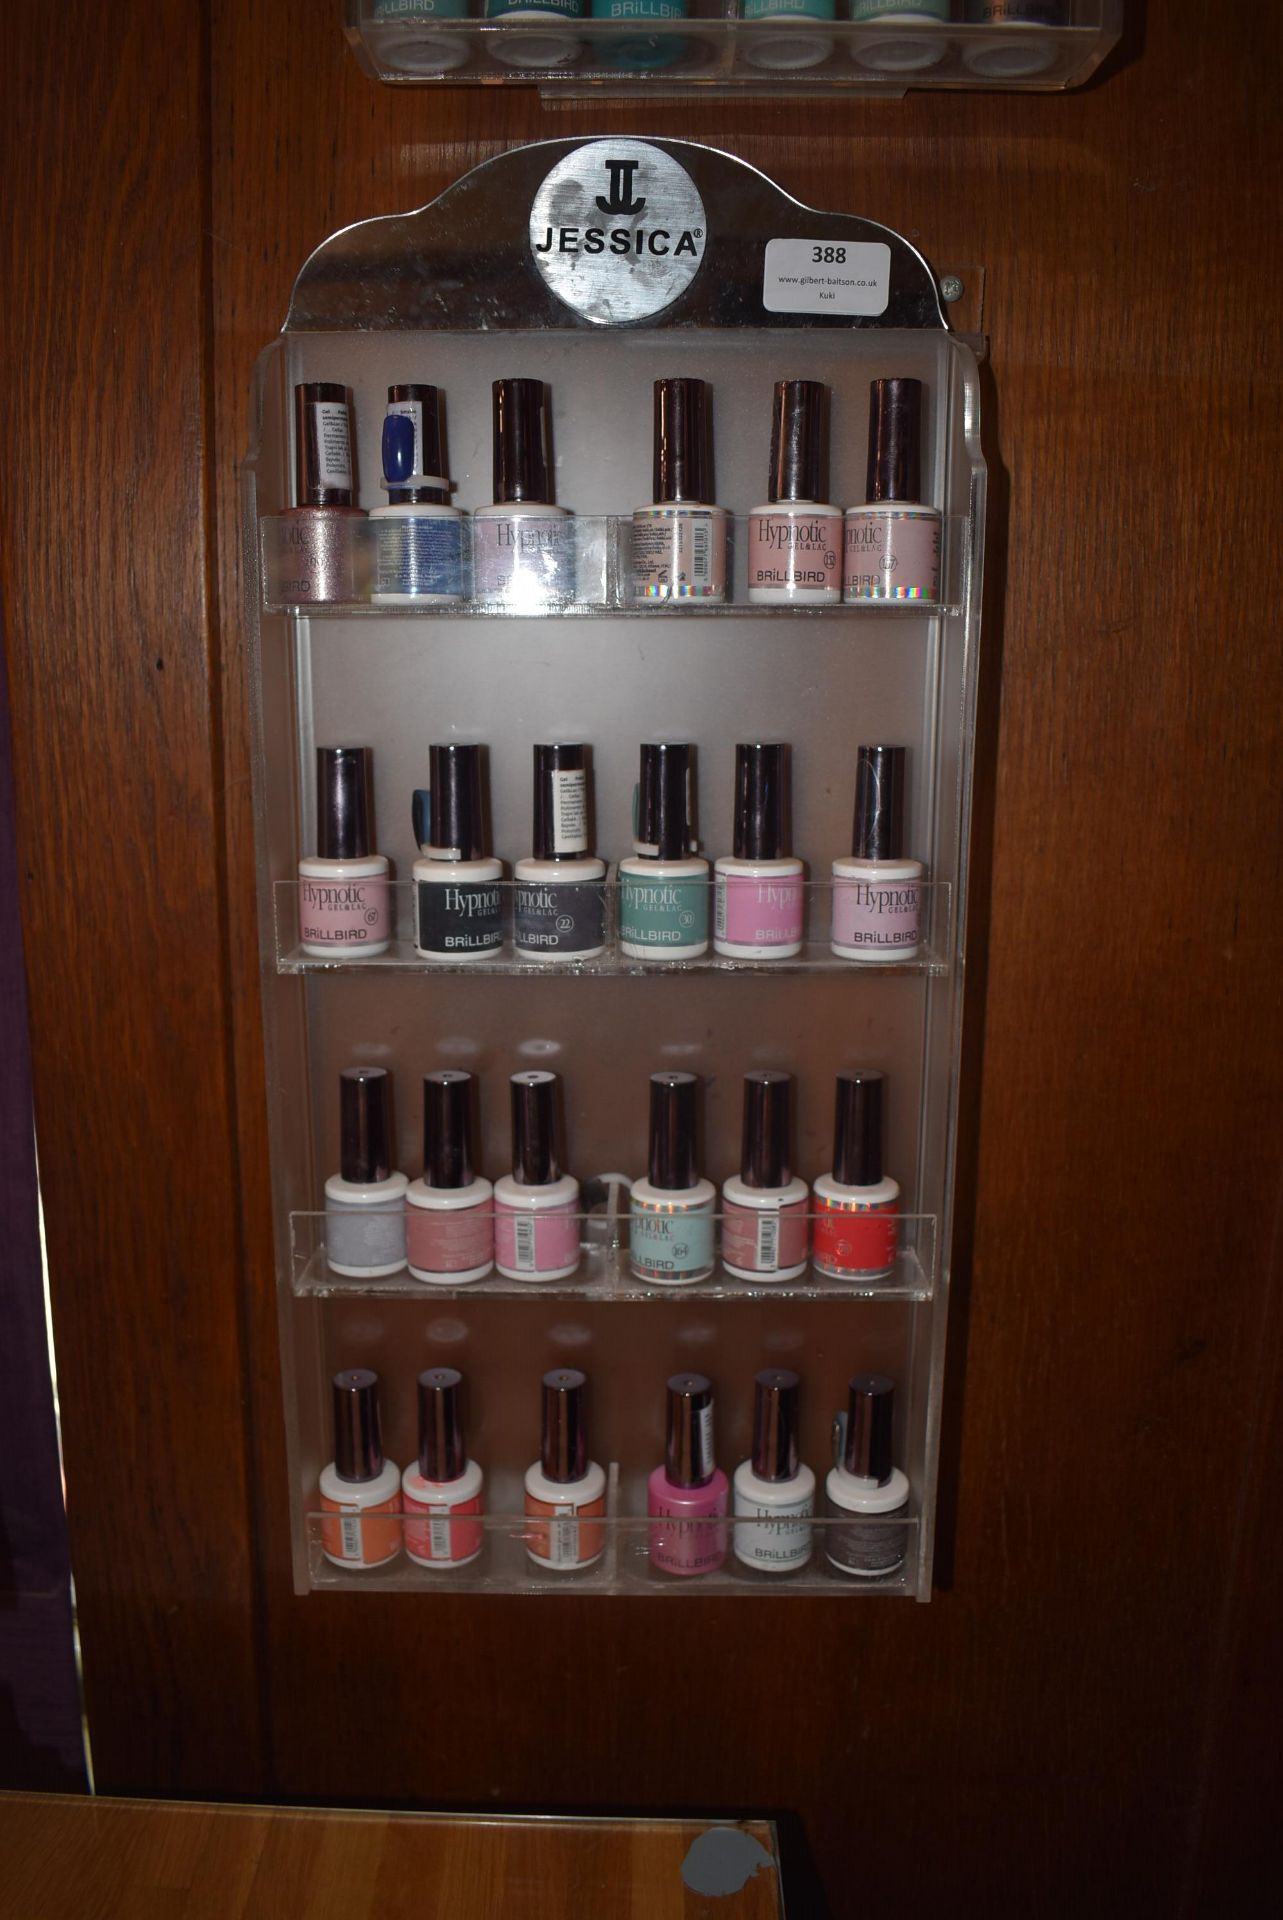 *Jessica Display Stand Containing Hypnotic Nail Gel